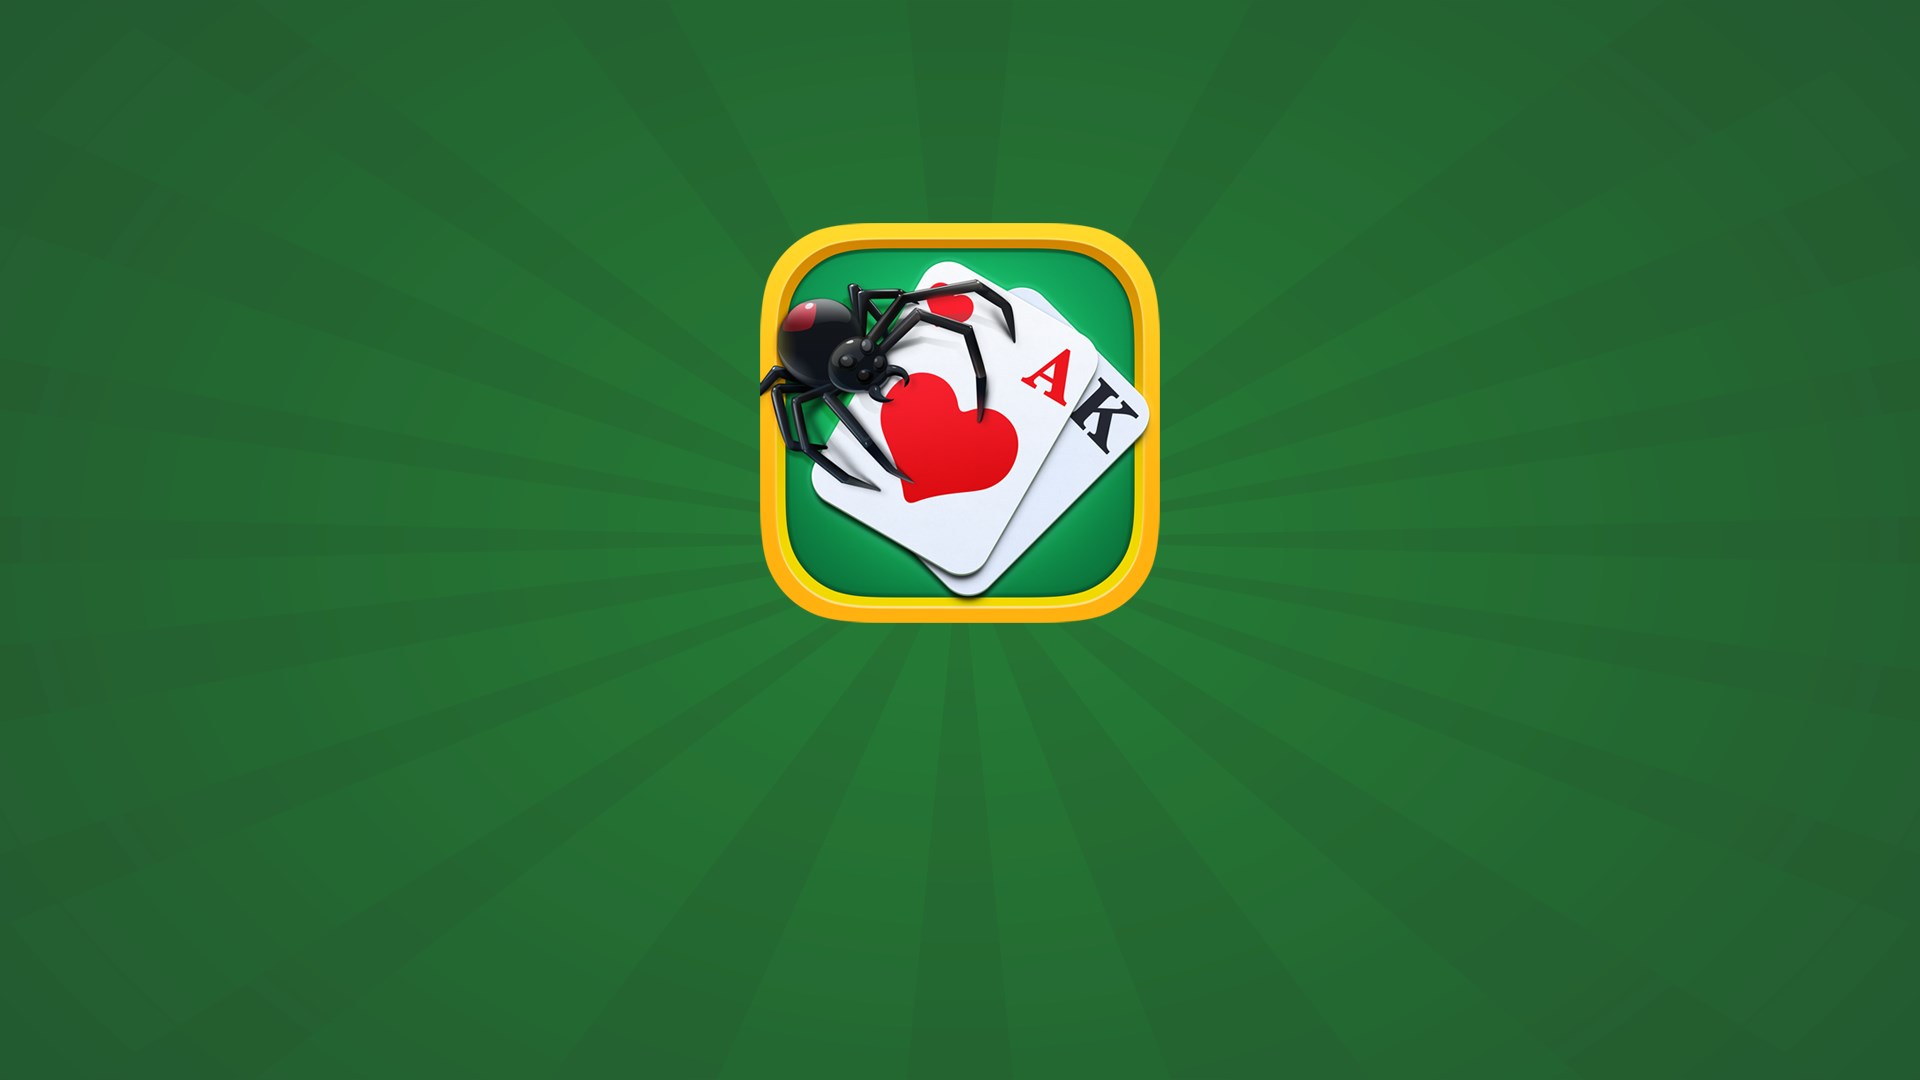 spider solitaire card games free